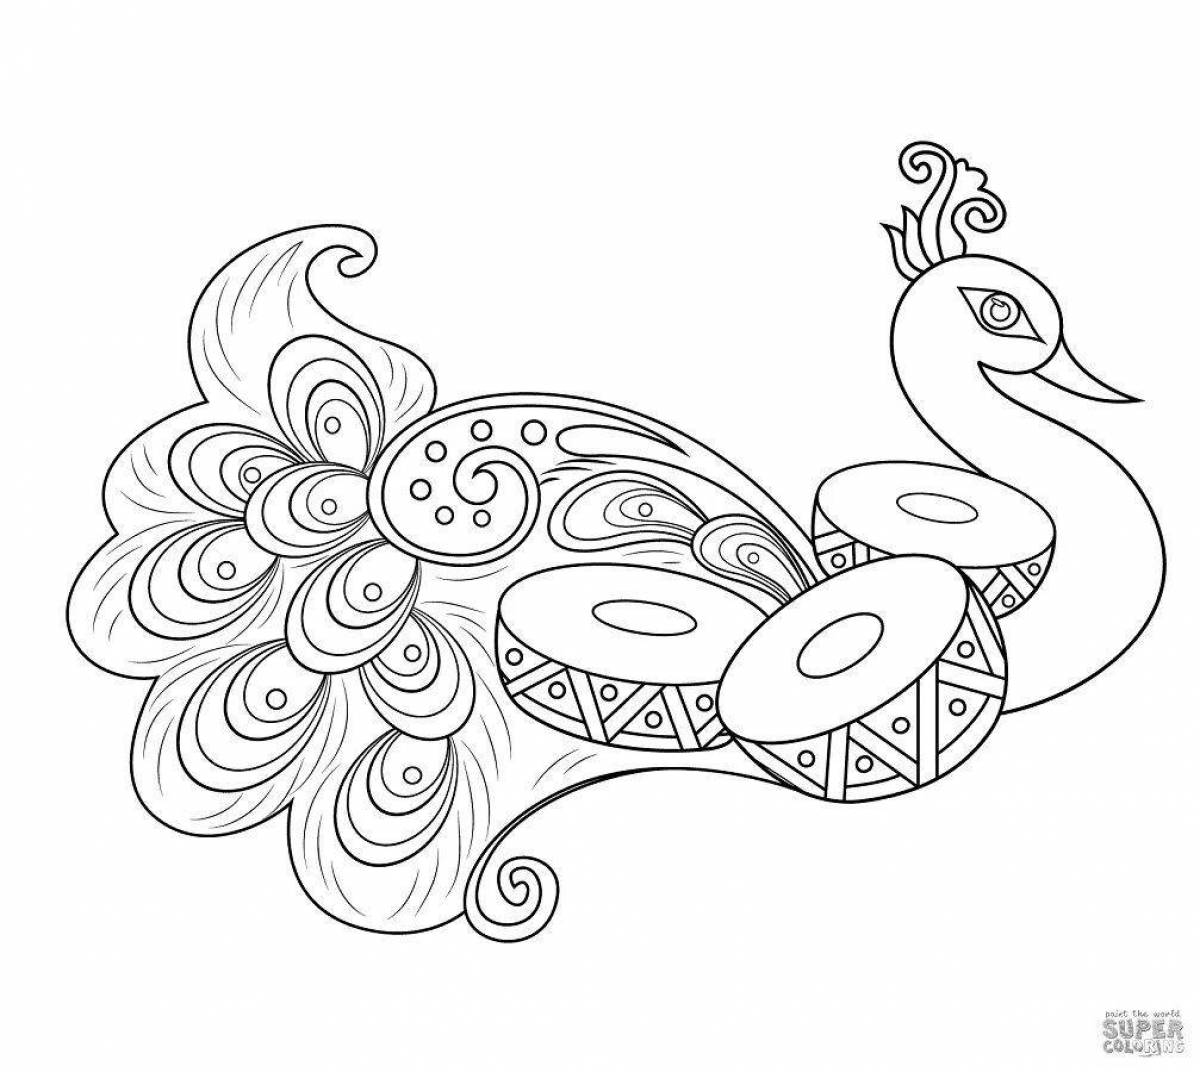 Gorgeous firebird coloring book for 5-6 year olds